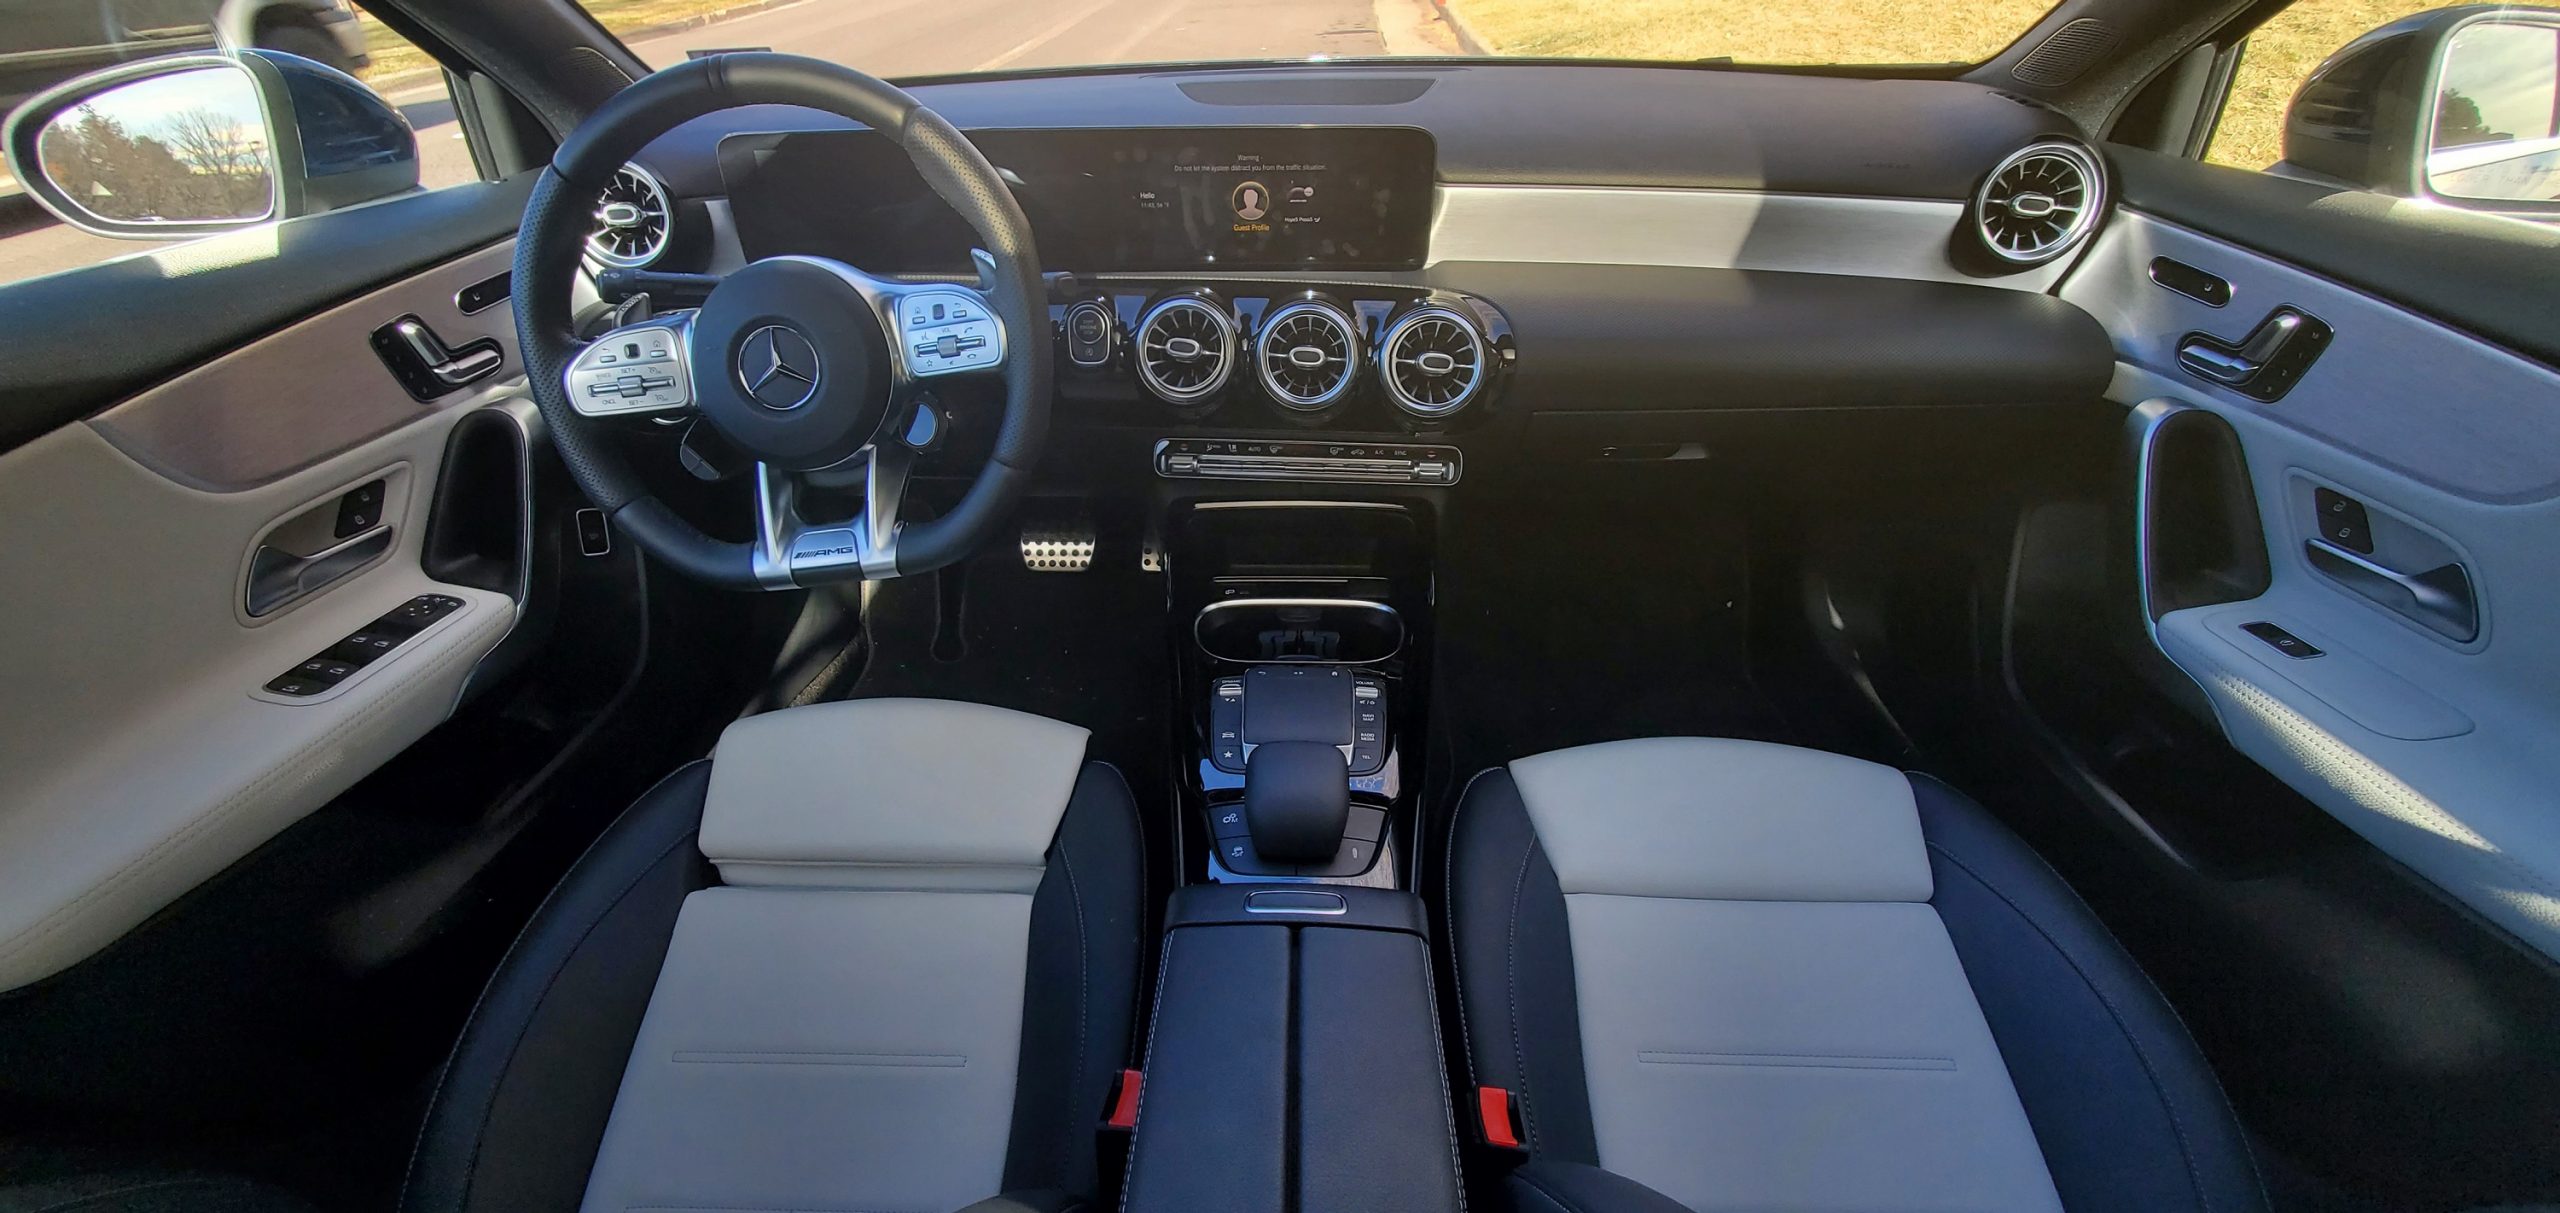 The interior of the AMG A35 sedan with two-tone black and white leather seats